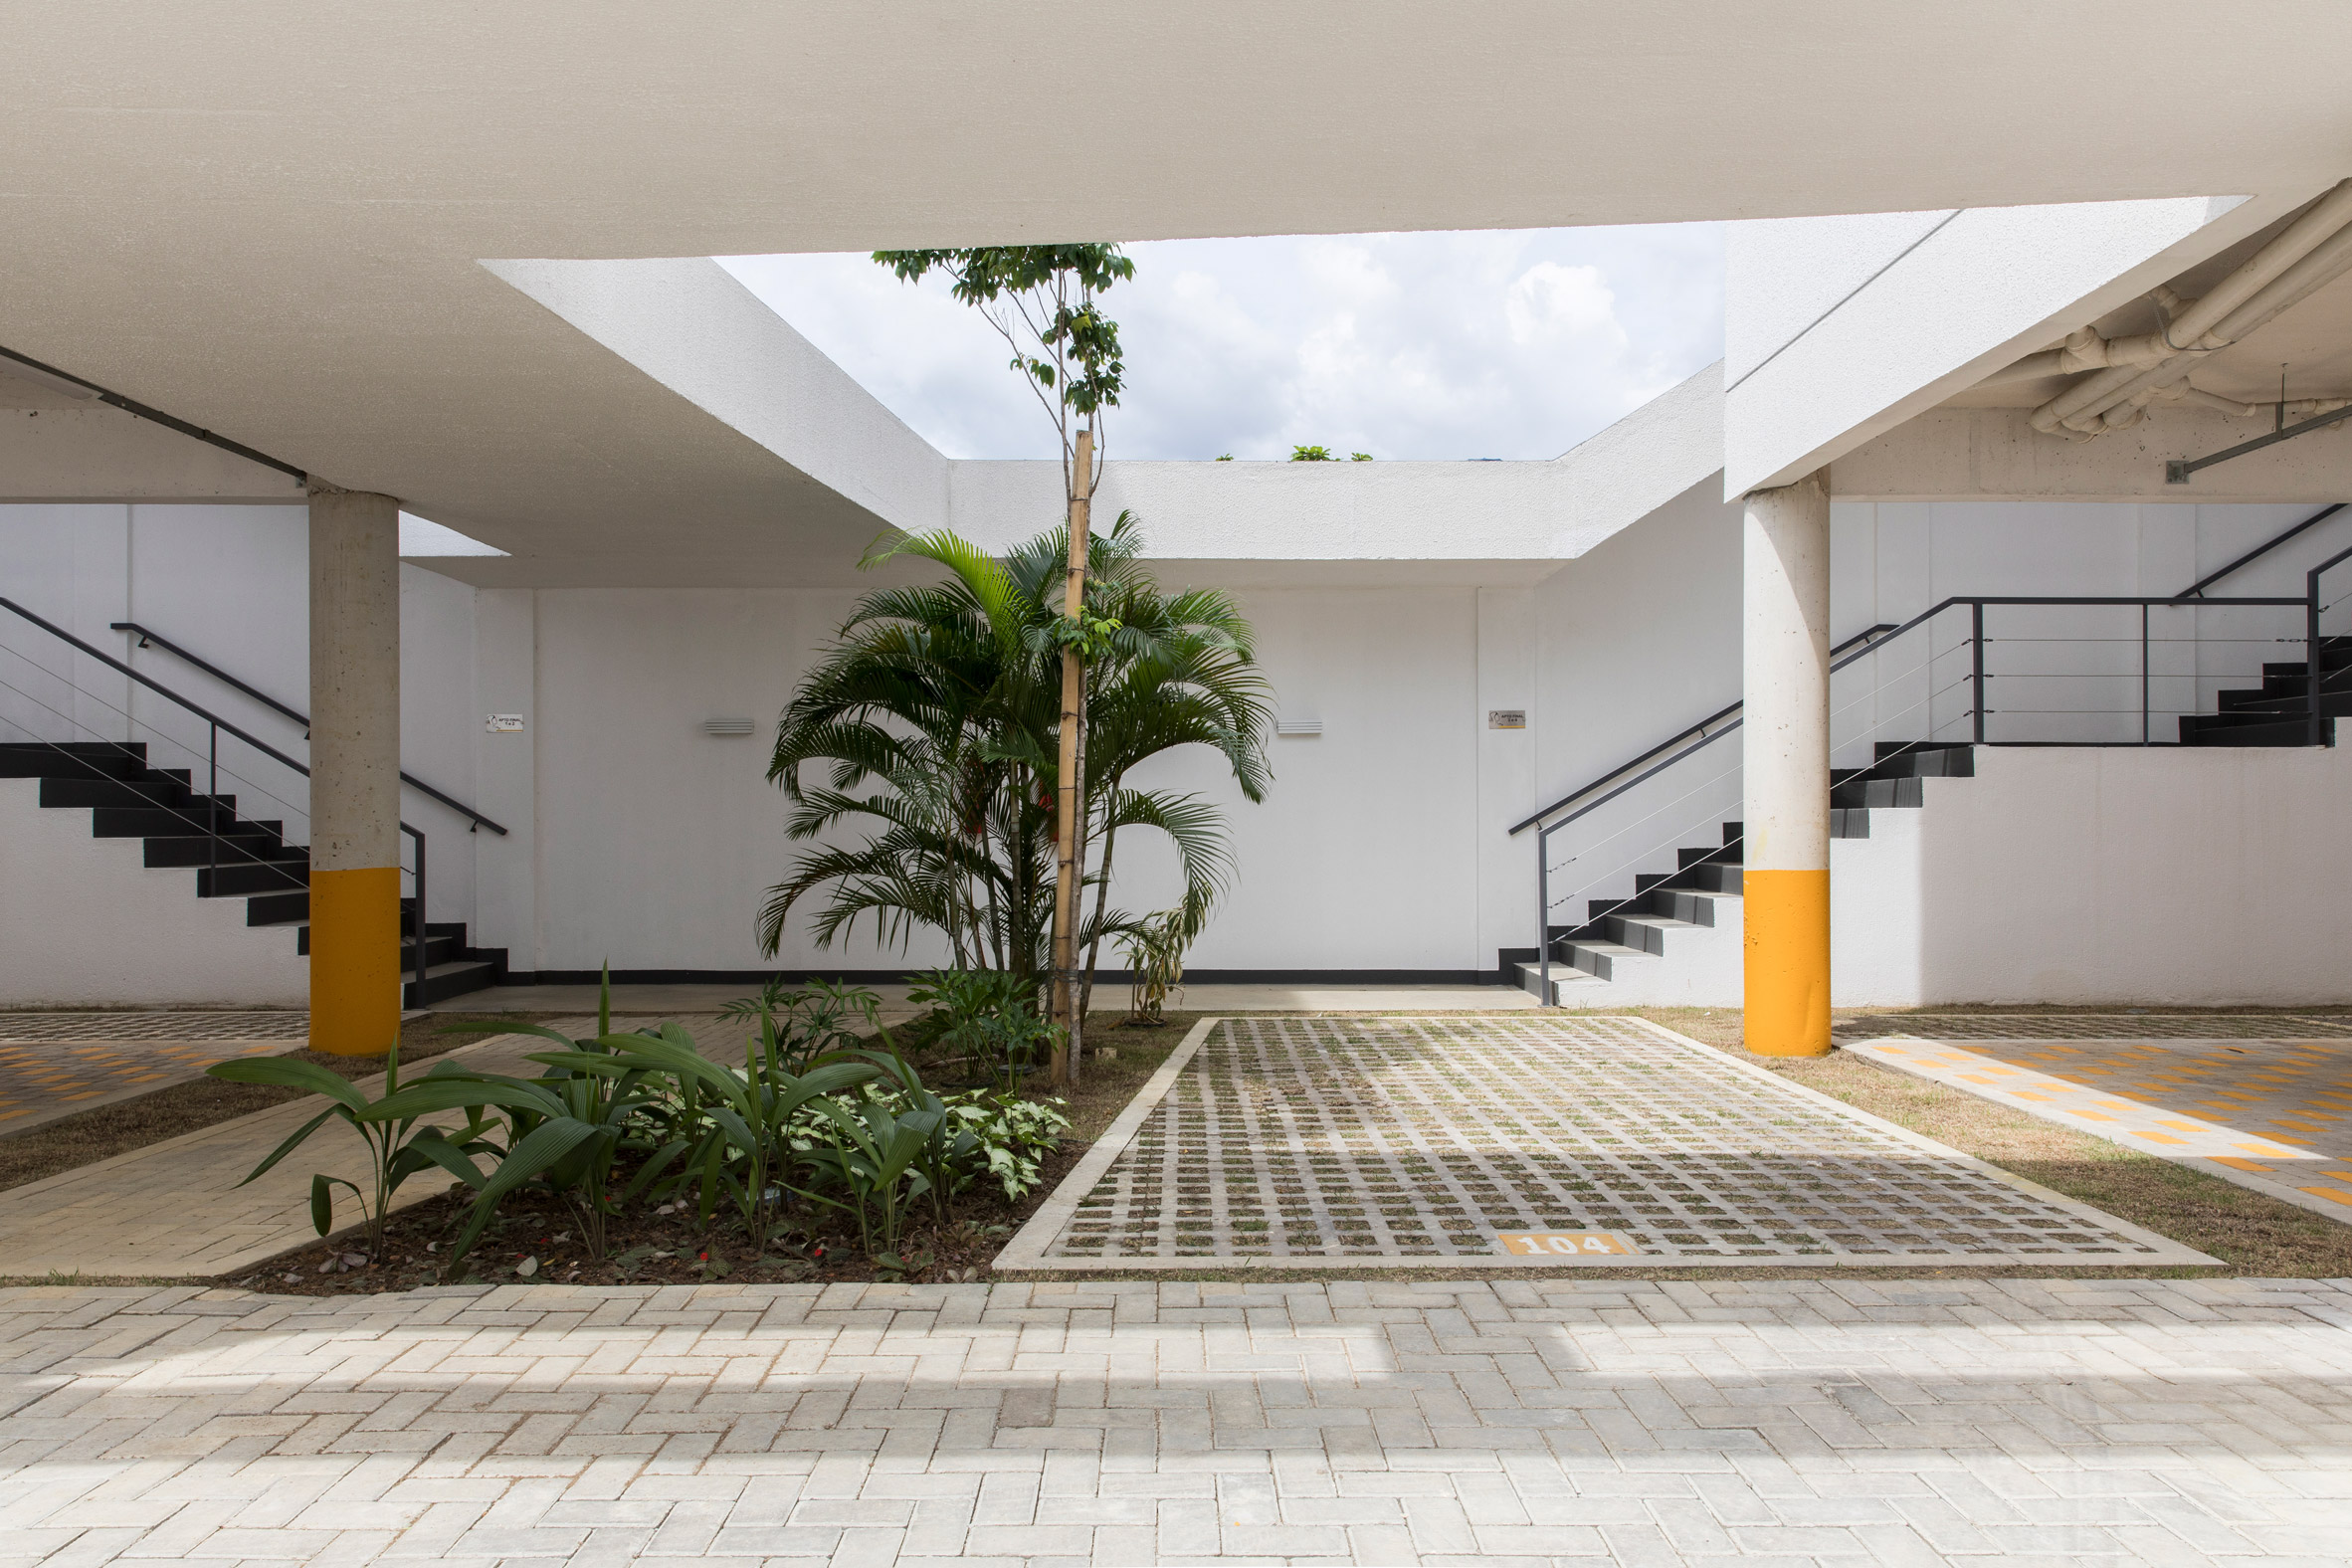 Manga Vila Santa Thereza by Laurent Troost Architectures